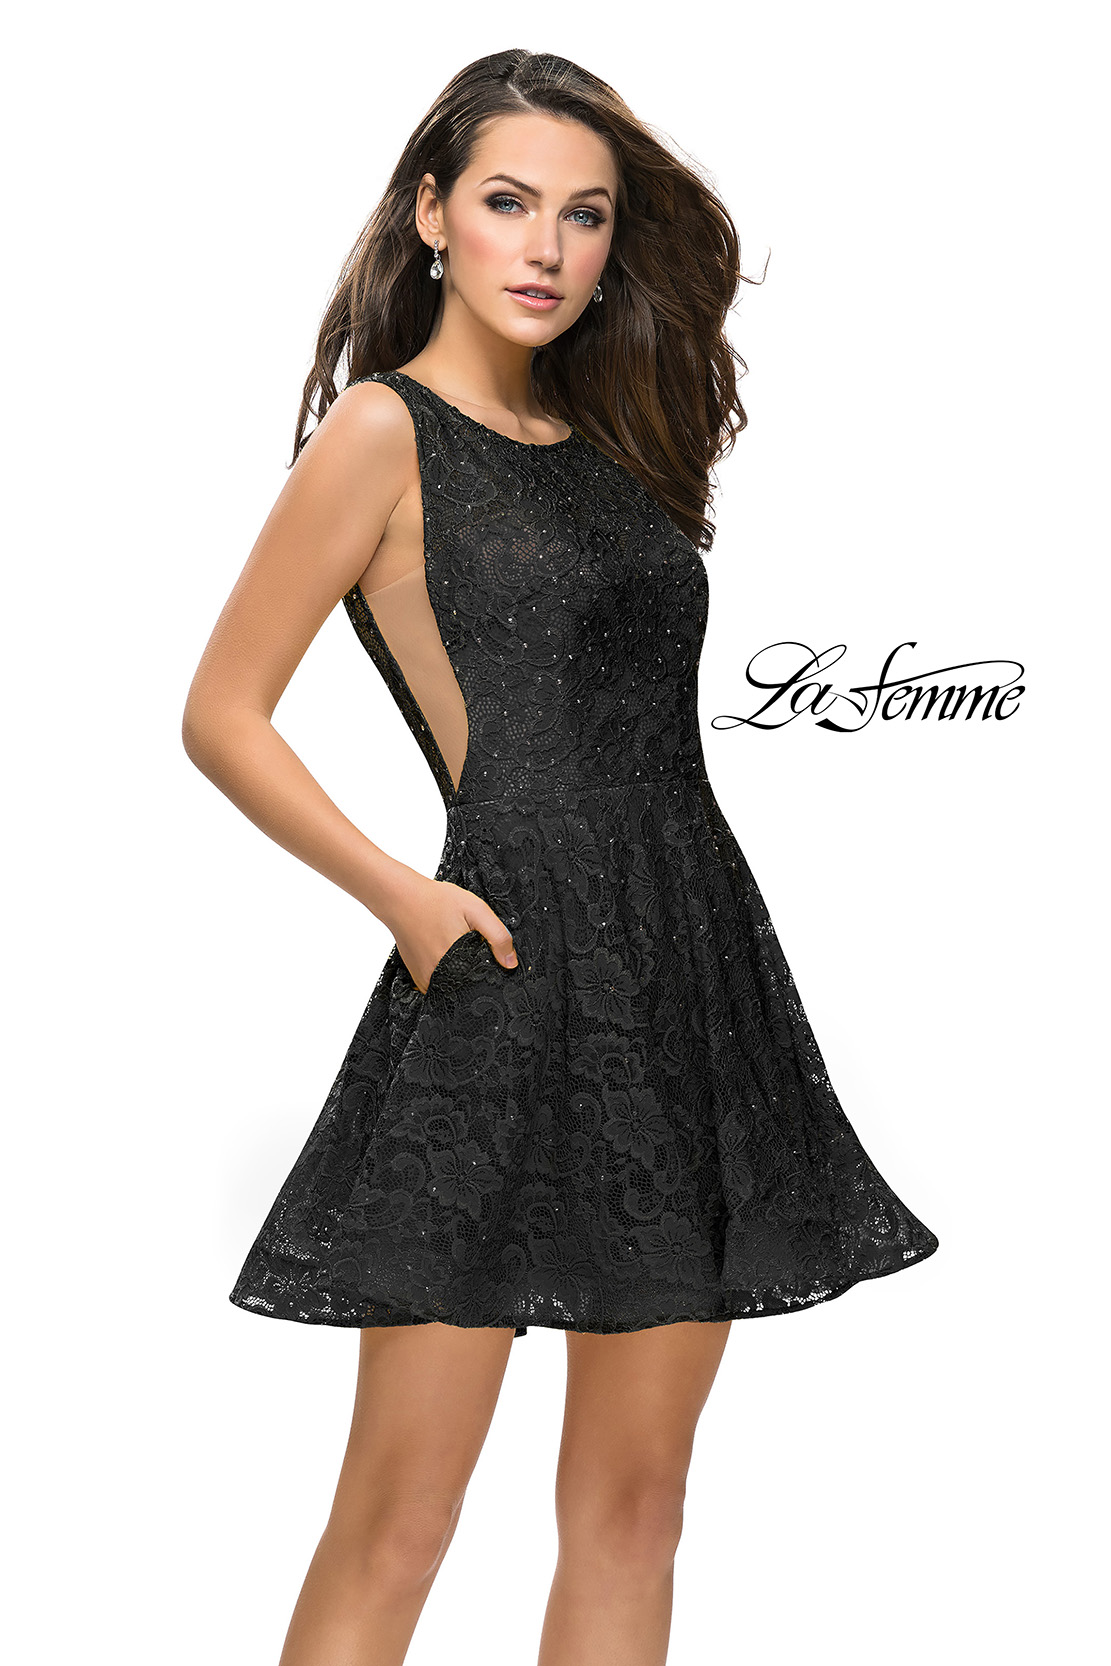 Black Lace Homecoming Dress with Pockets by La Femme